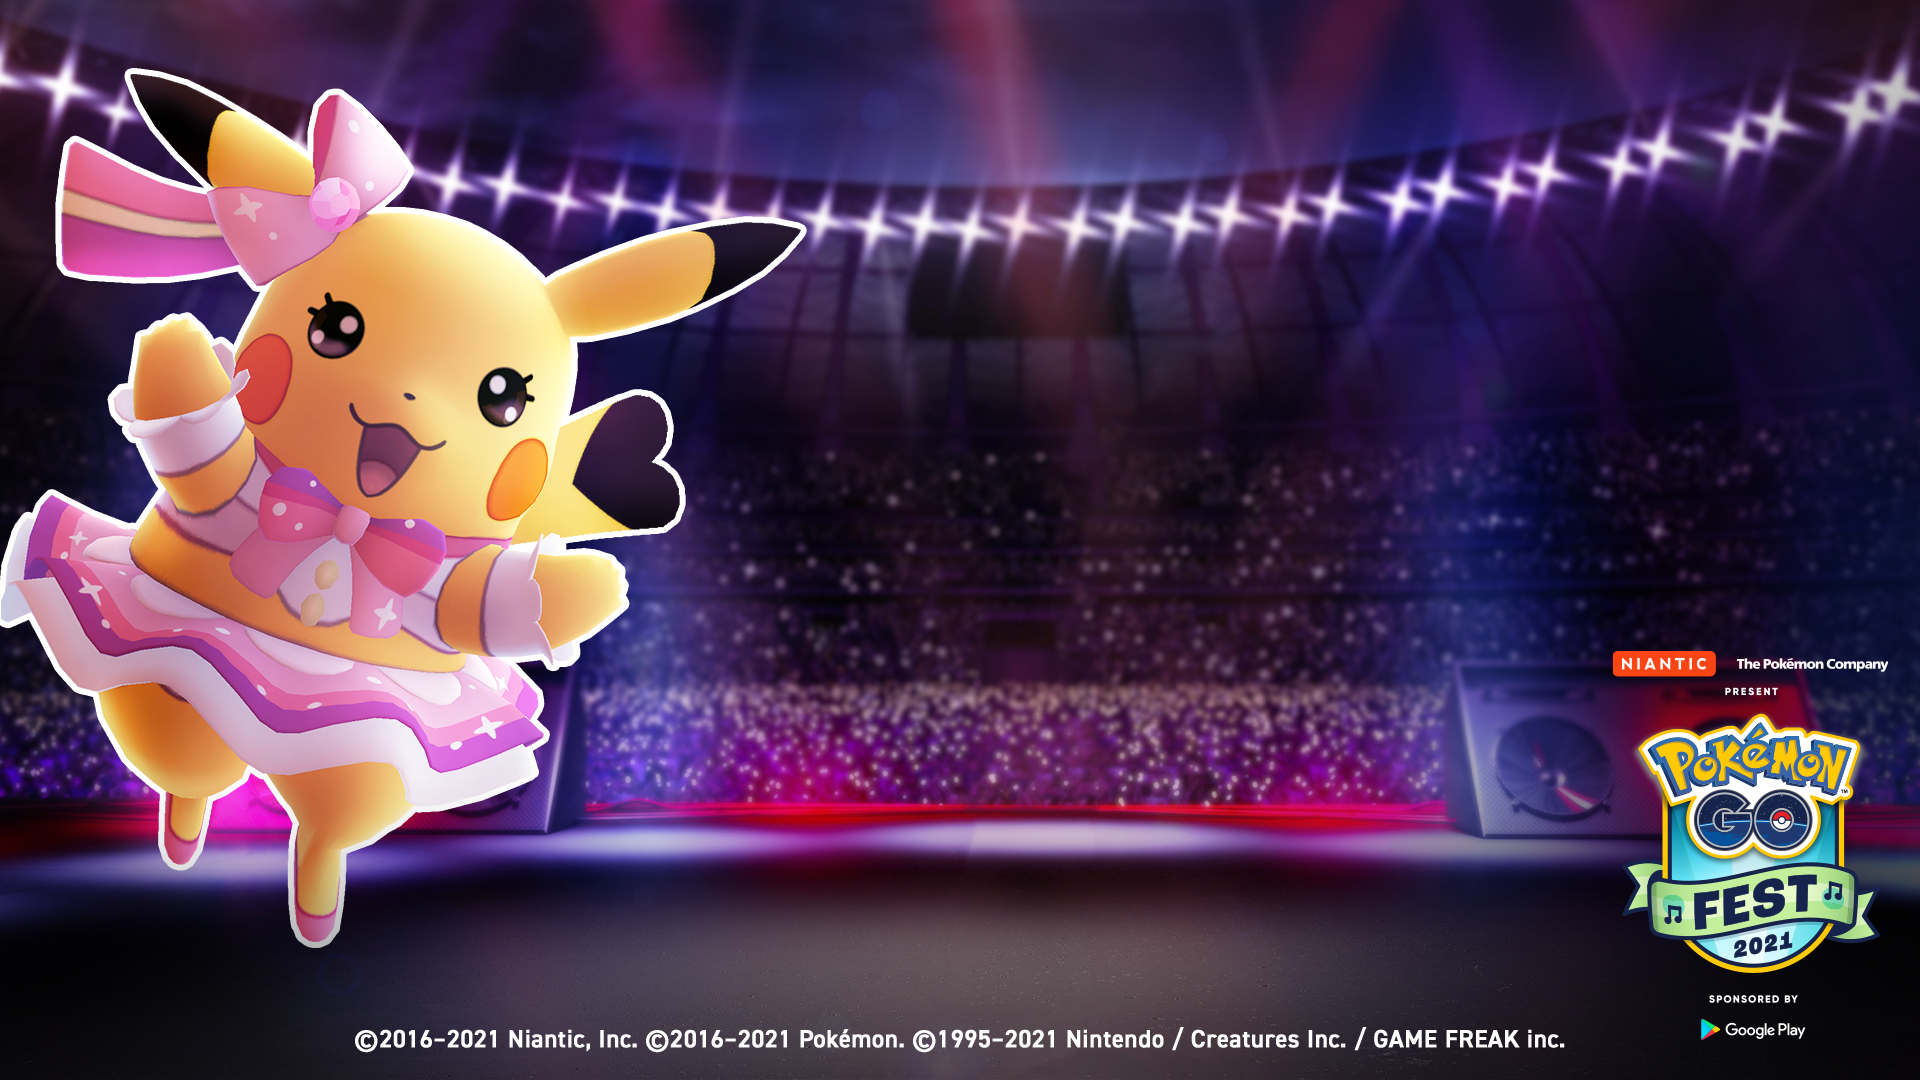 Pokémon GO on Twitter: "Are you going be rocking out with Pikachu Rock Star 🎸 during #PokemonGOFest2021 or belting out with Pikachu Pop Star? 🎤 Show off your by